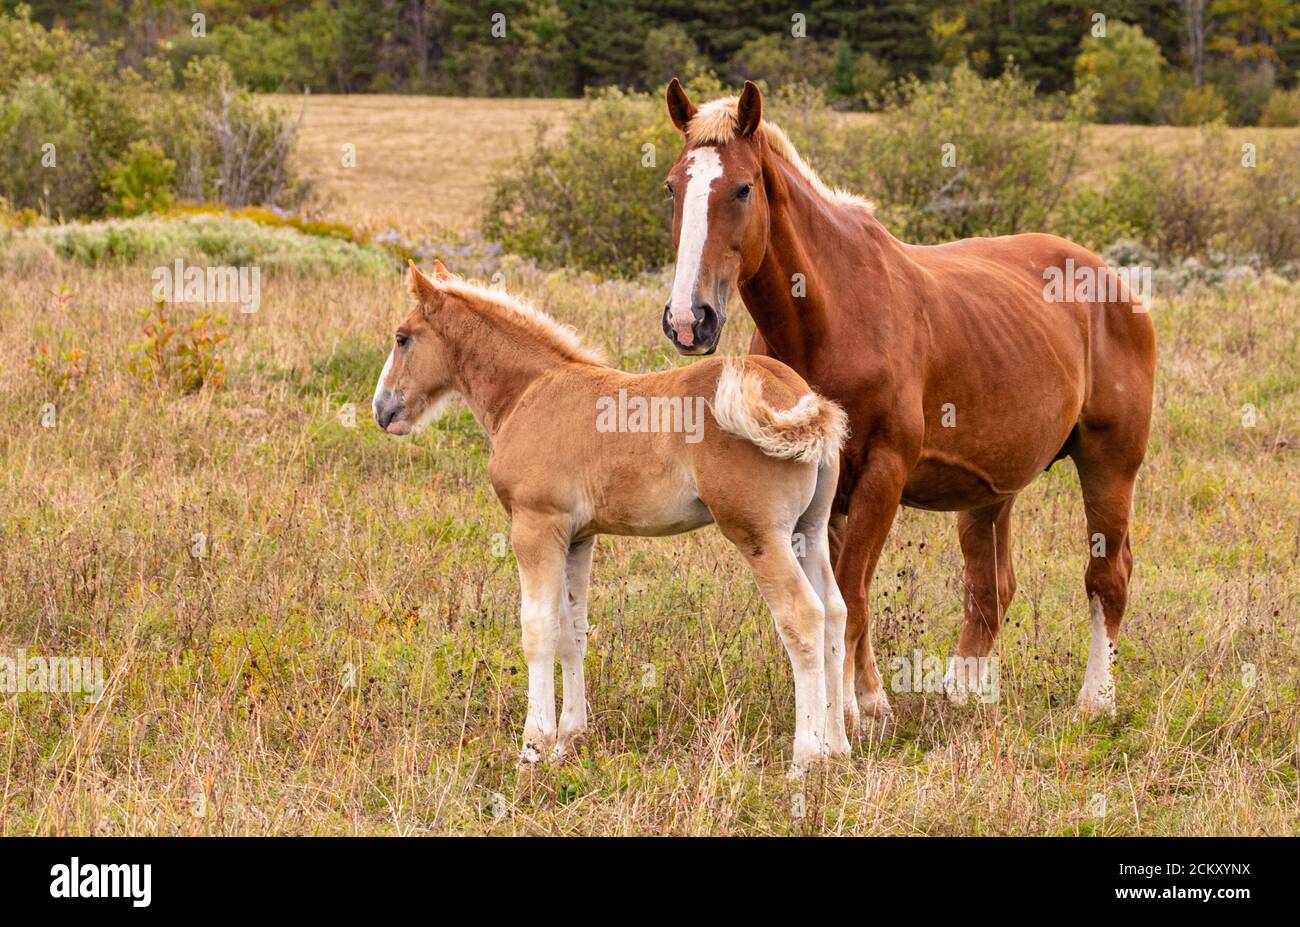 Stallion and colt standing together in a grassy field in Speerville, New Brunswick, Canada. Stock Photo